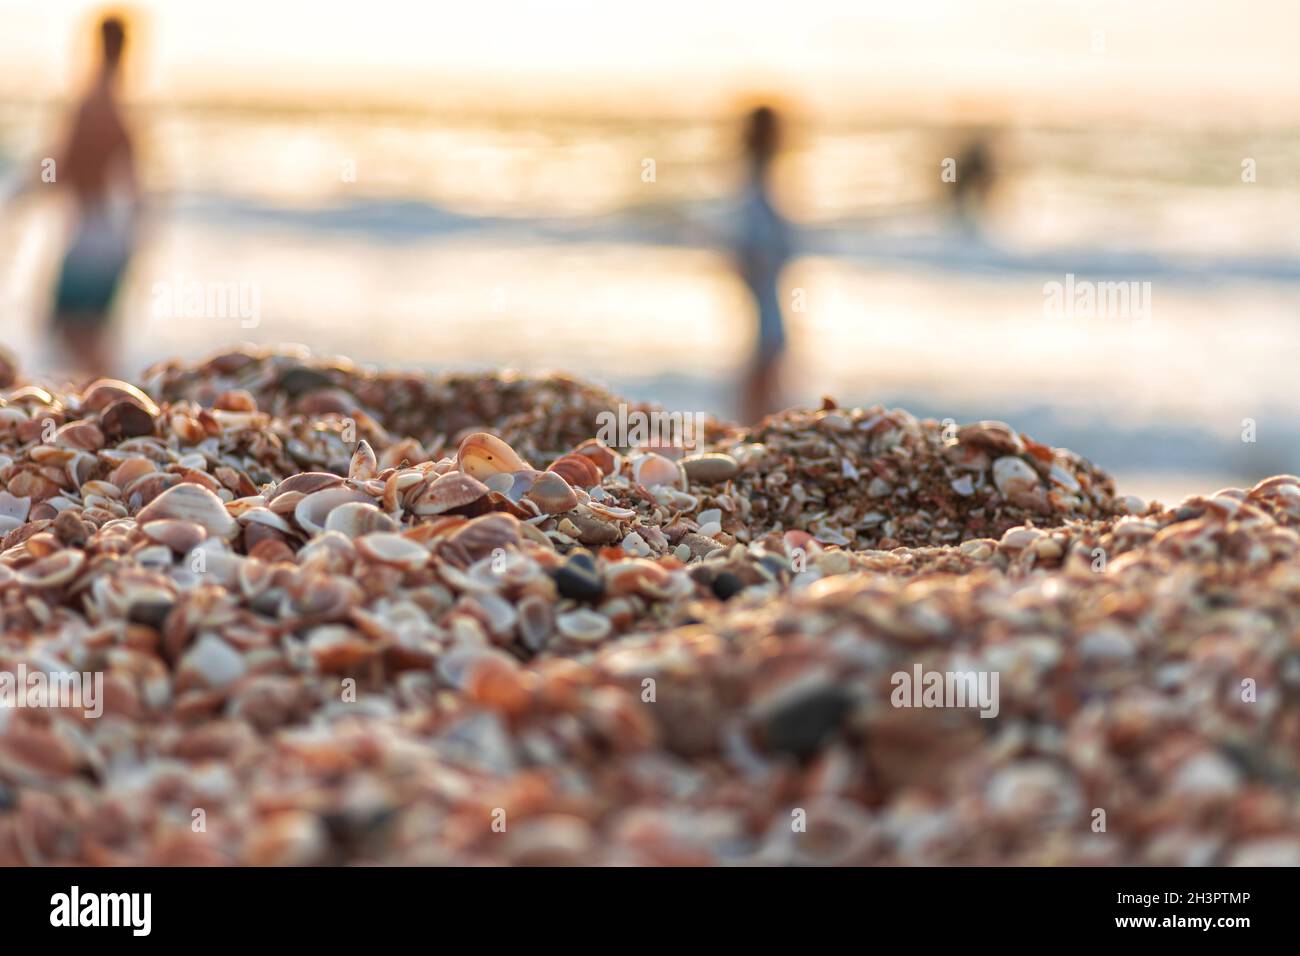 Sunset on the Mediterranean Sea. Coast with heaps of seashells. Silhouettes of walking people Stock Photo